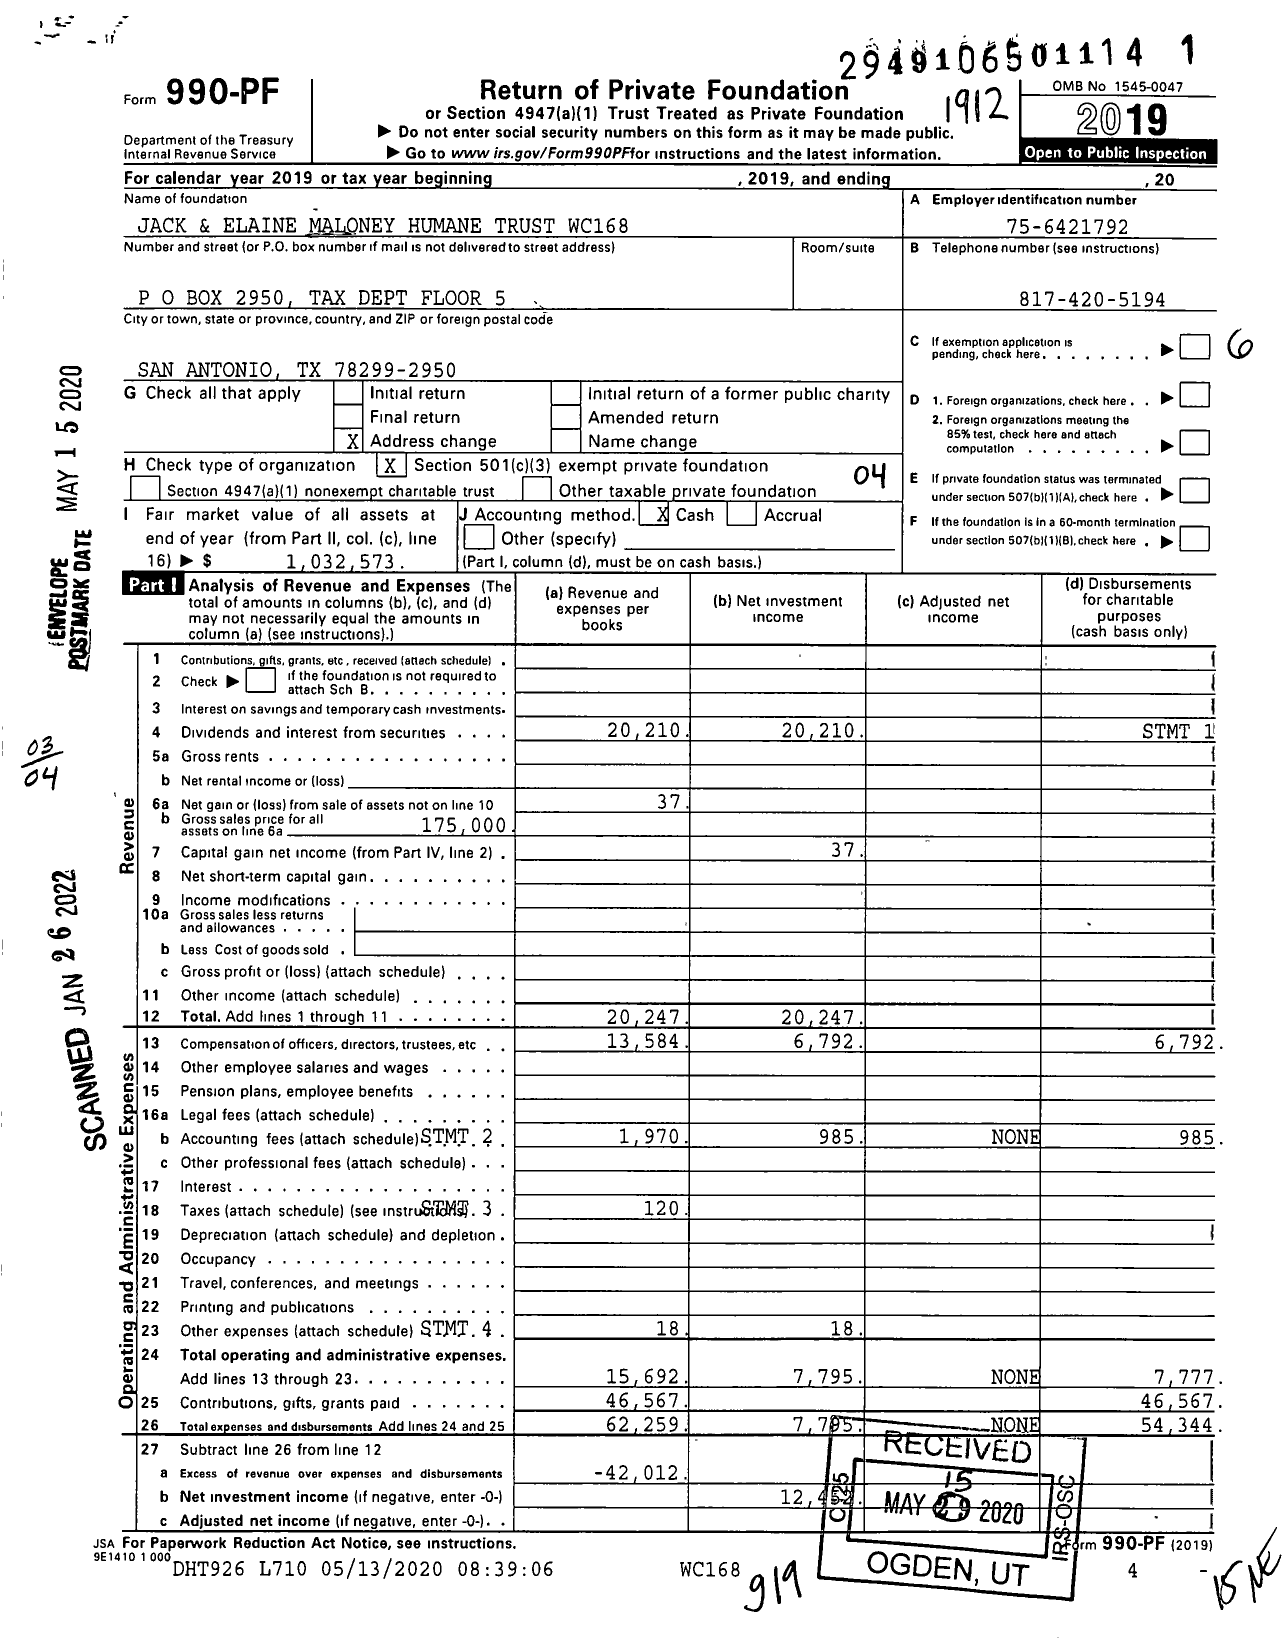 Image of first page of 2019 Form 990PF for Jack and Elaine Maloney Humane Trust WC168